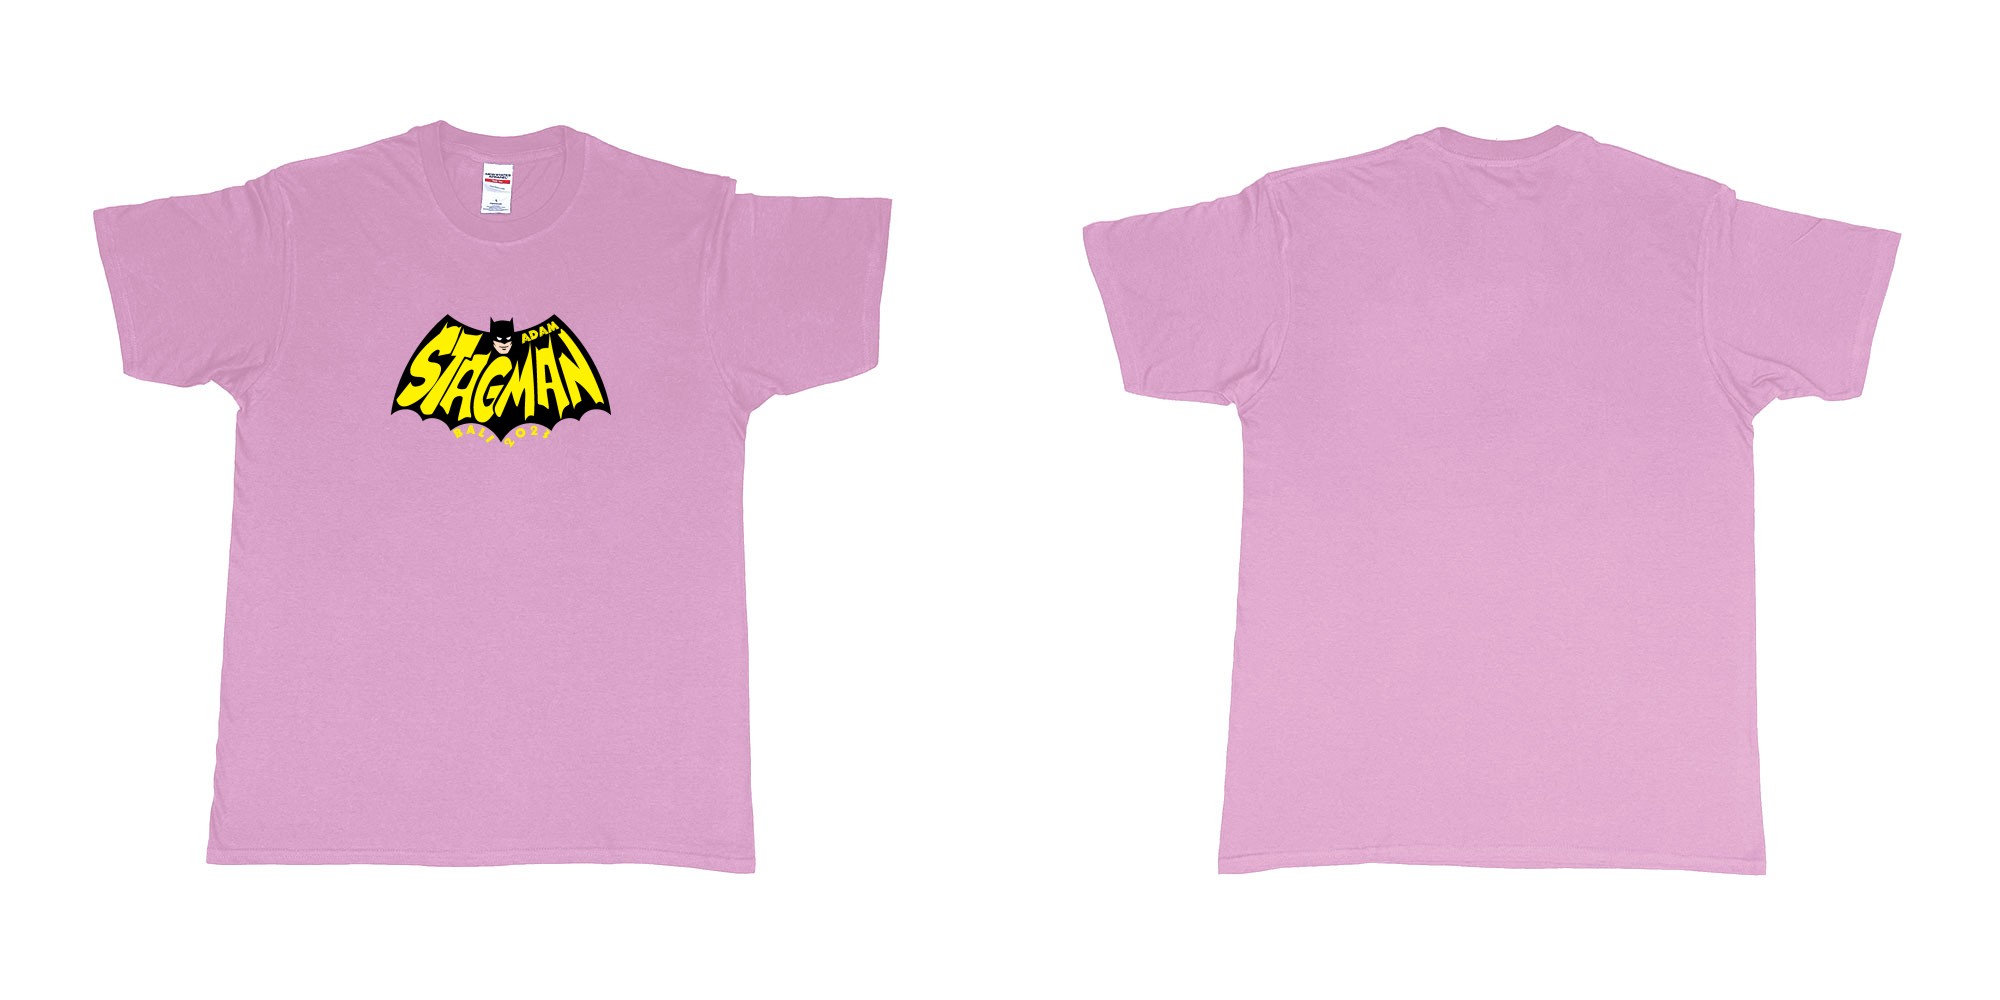 Custom tshirt design Batman StagMan Old School in fabric color light-pink choice your own text made in Bali by The Pirate Way